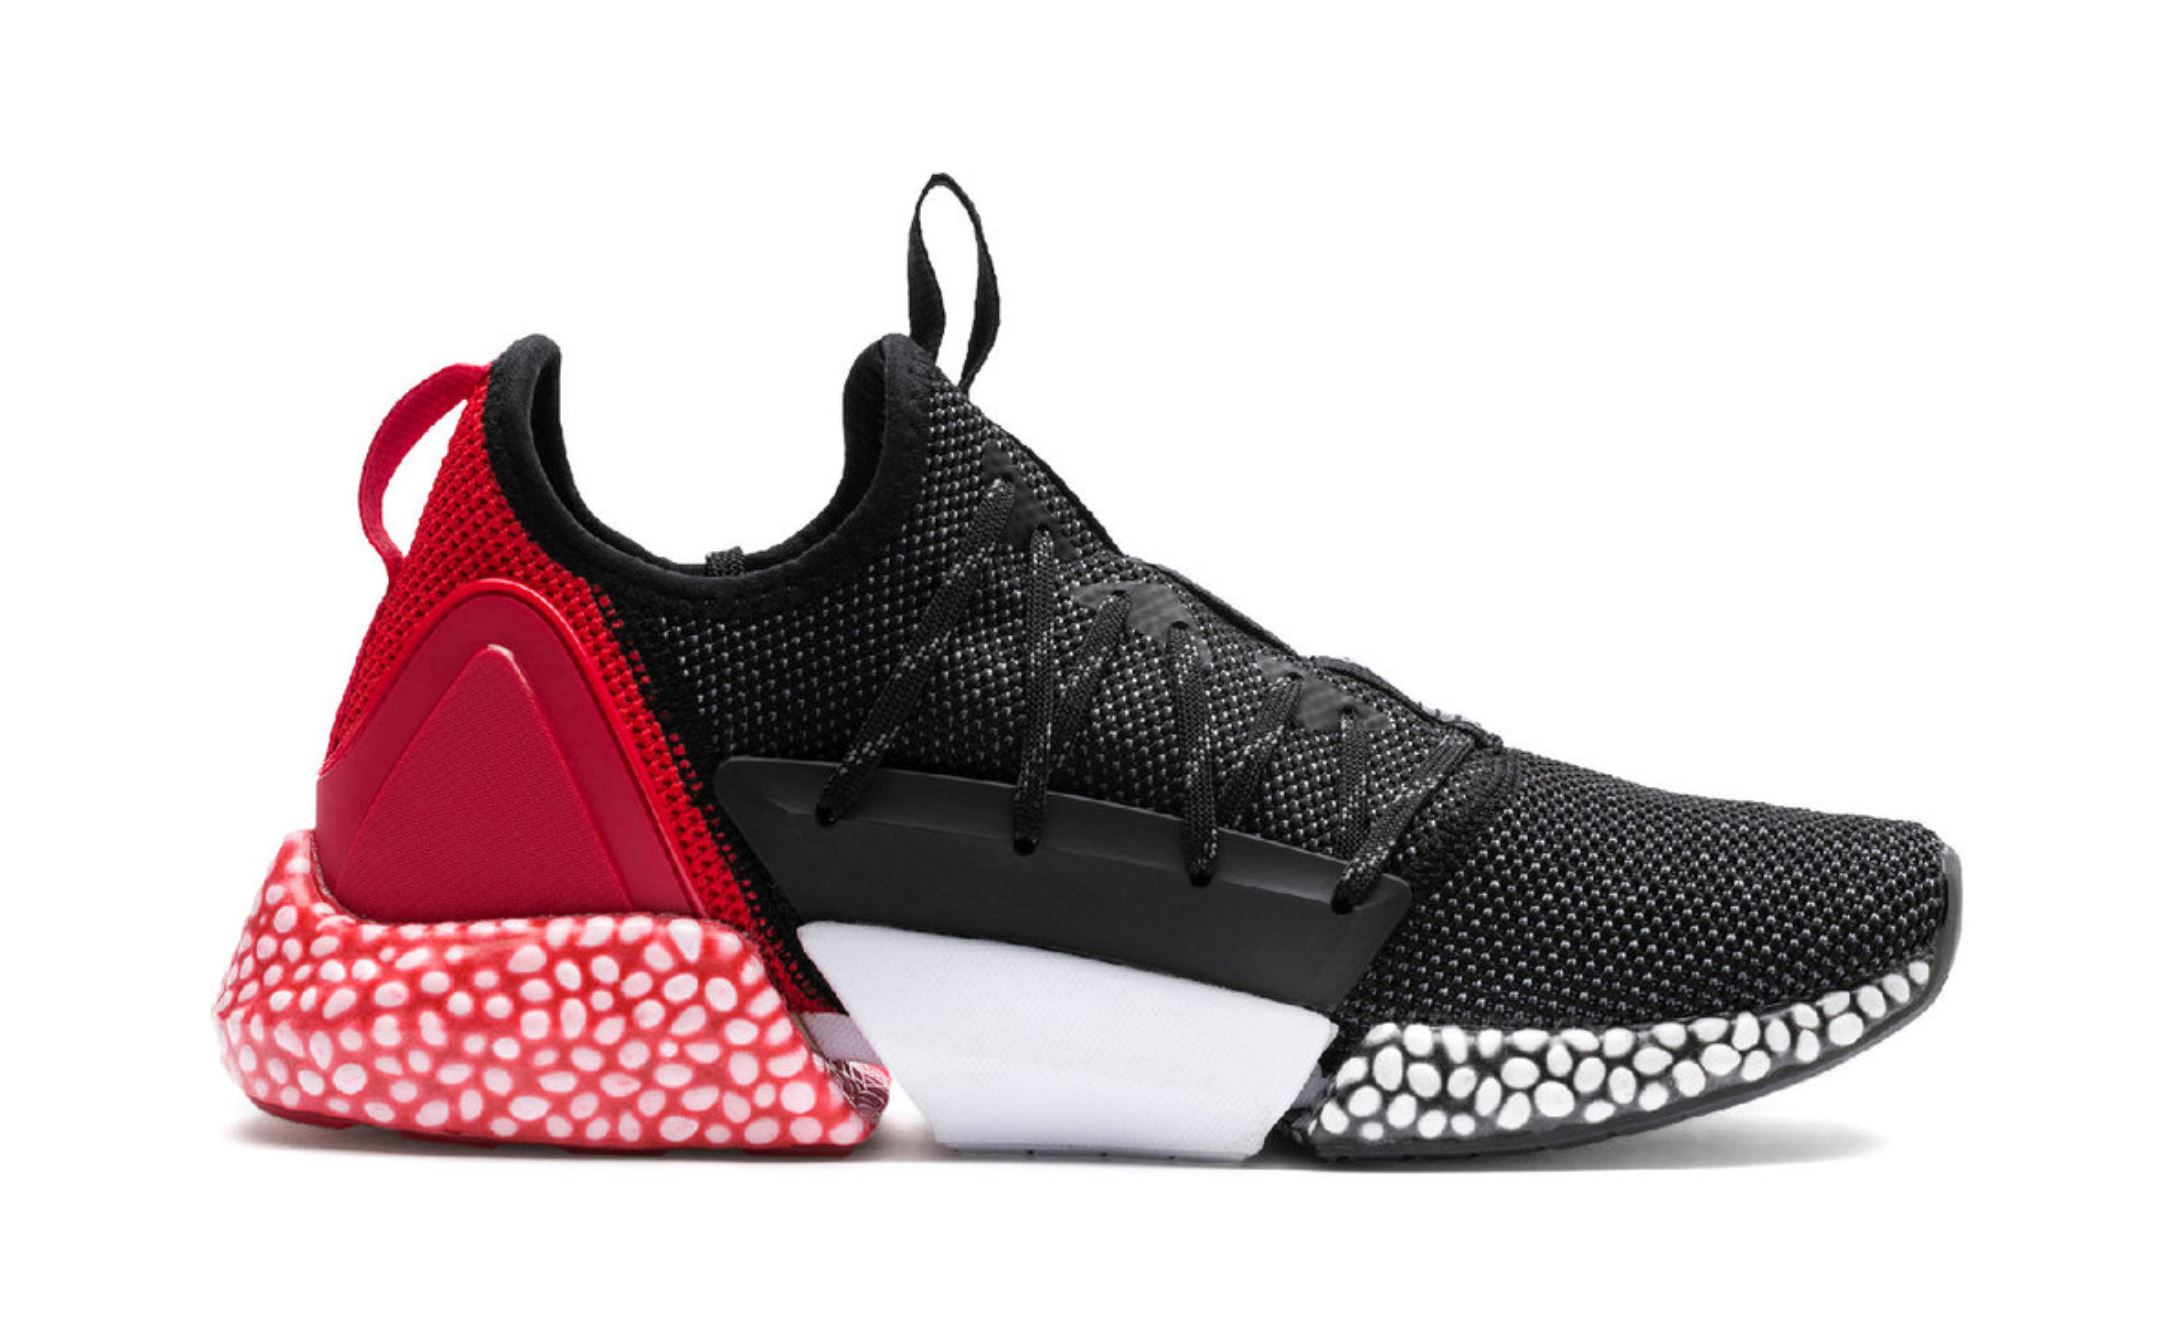 The Puma Hybrid Rocket Has Landed, With 